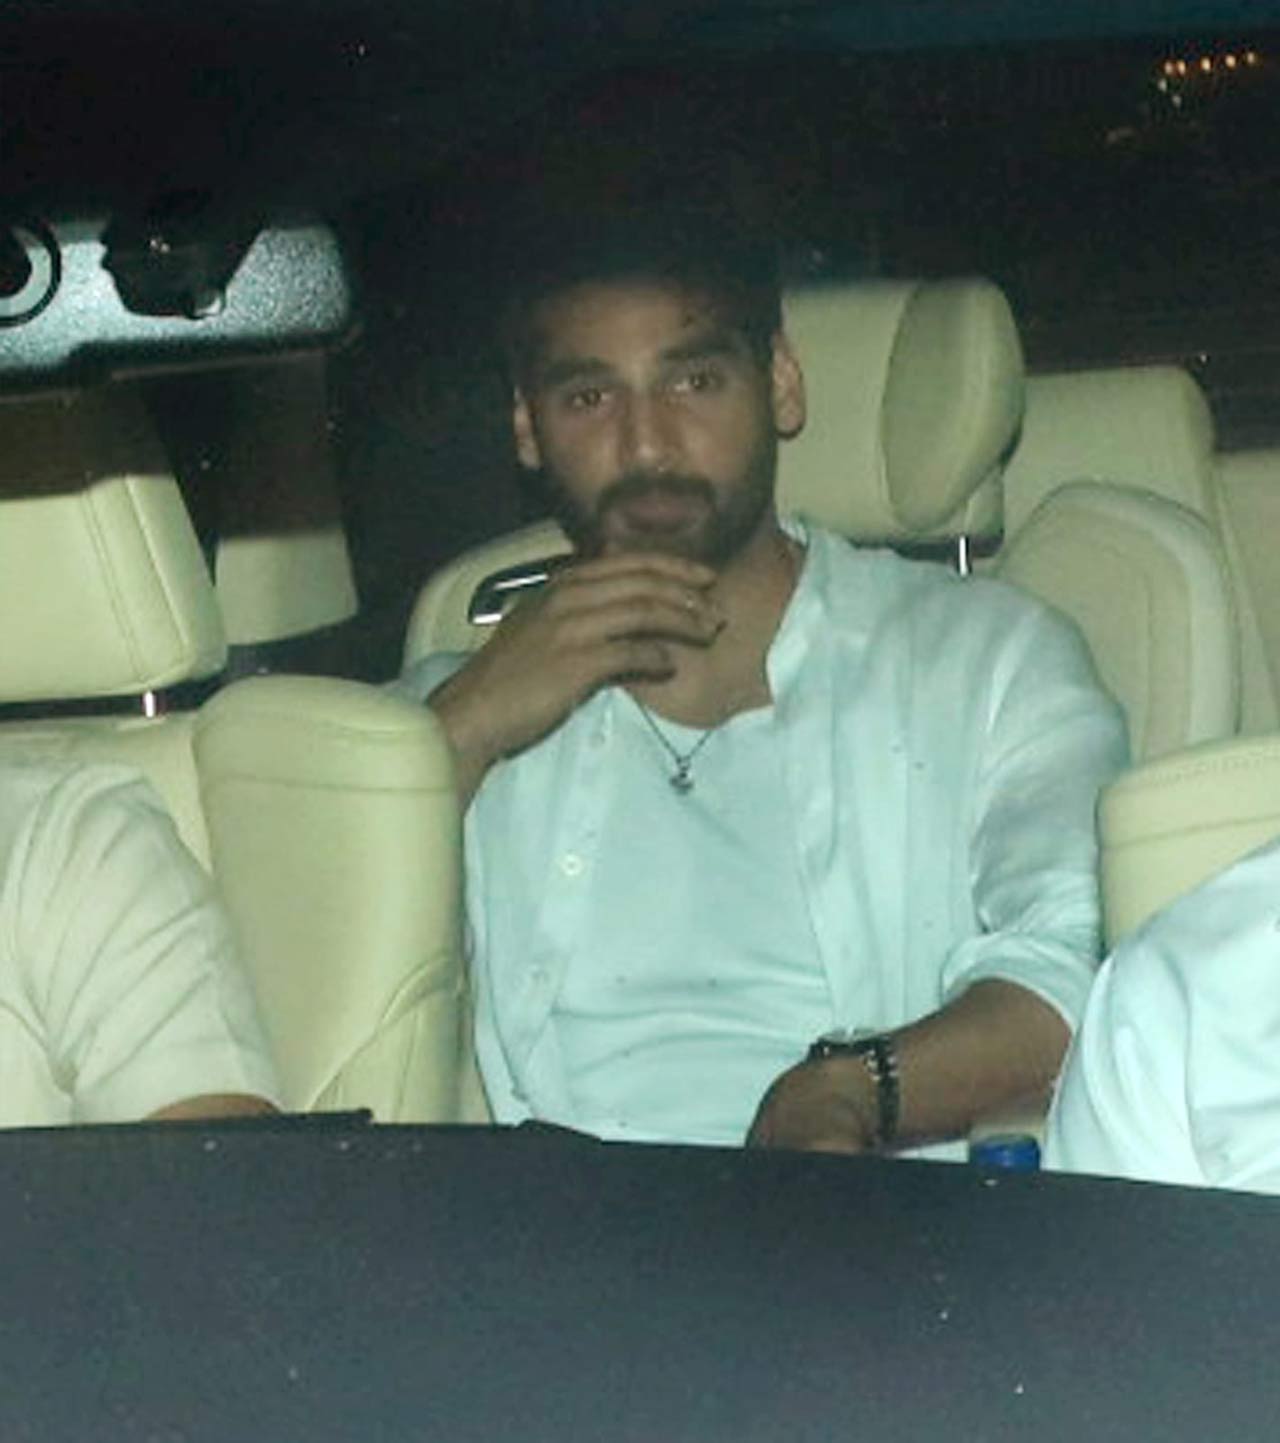 Ahan Shetty, who is set to make his Bollywood debut with Tadap, opposite Student Of The Year 2 fame Tara Sutaria, walked into Khushi Kapoor's birthday party with his friend Tania Shroff.